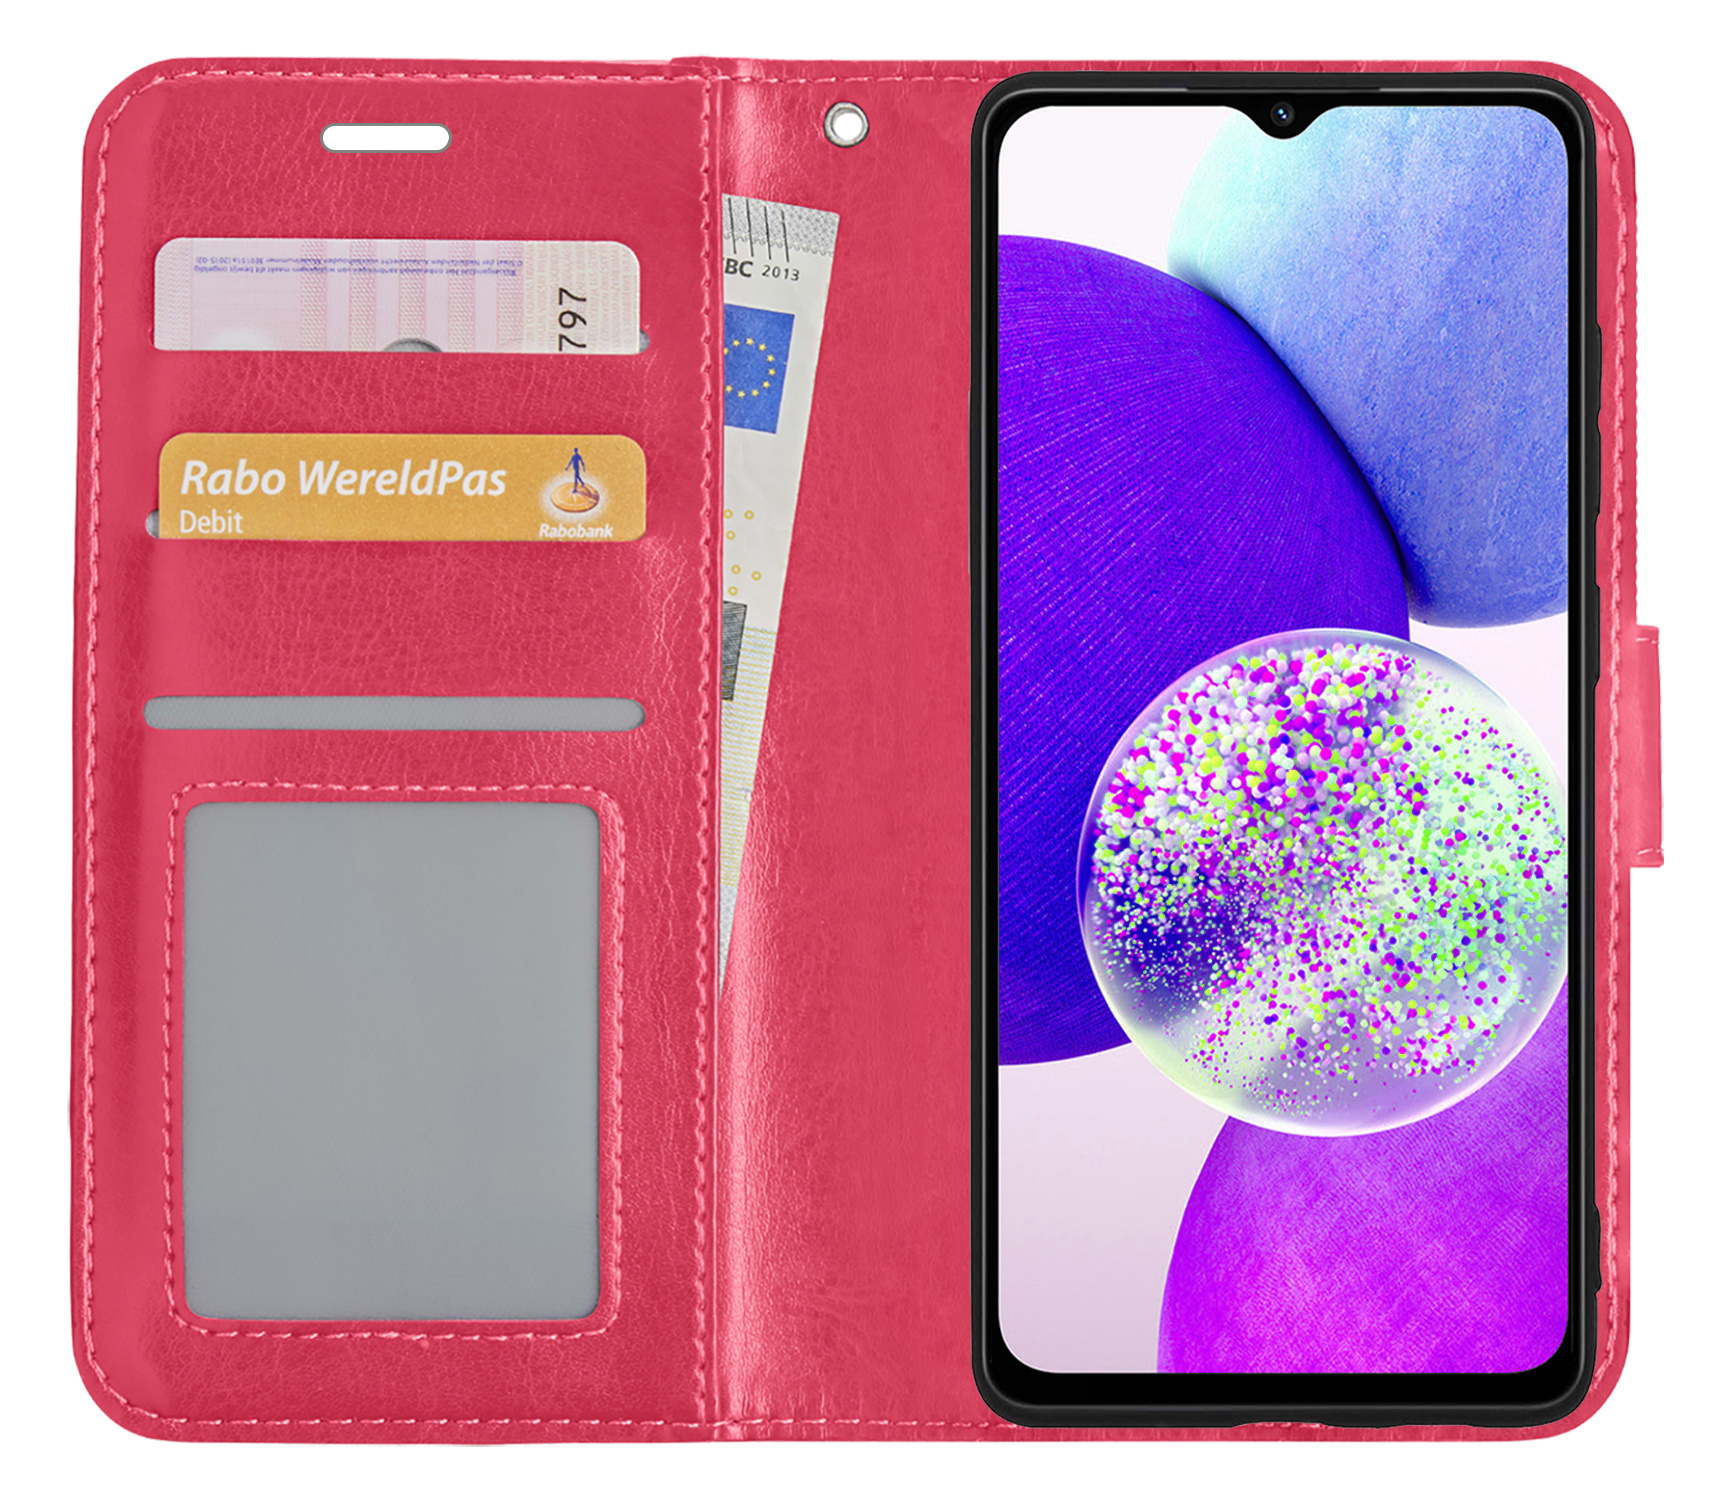 Samsung A14 Hoes Bookcase Flipcase Book Cover Met 2x Screenprotector - Samsung Galaxy A14 Hoesje Book Case - Donker Roze